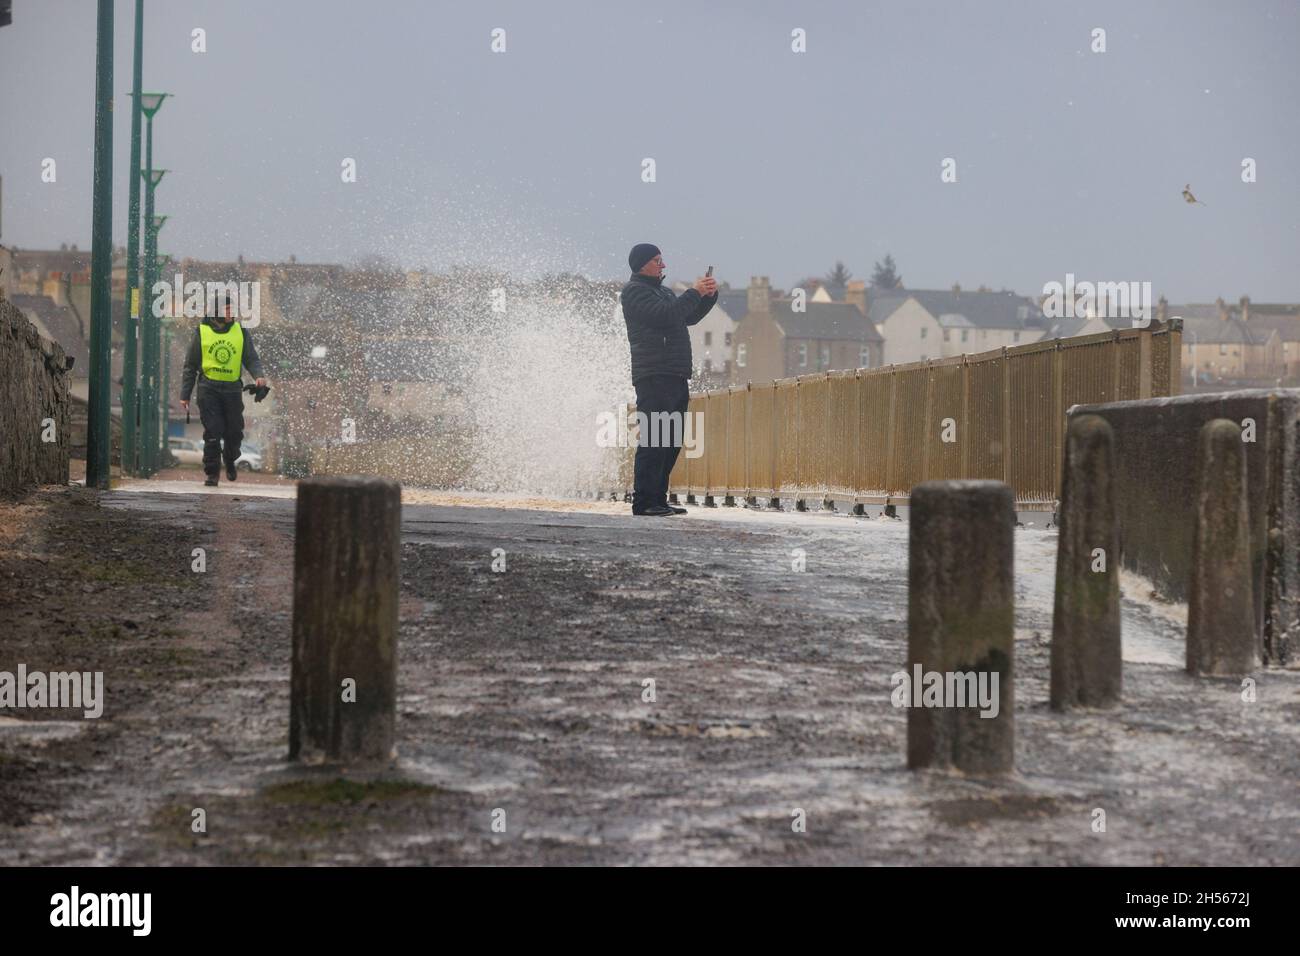 Thurso, Scotland. Nov. 7 2021. A man on a foam-covered  boardwalk takes a photograph while gale force winds send waves crashing behind him. Stock Photo